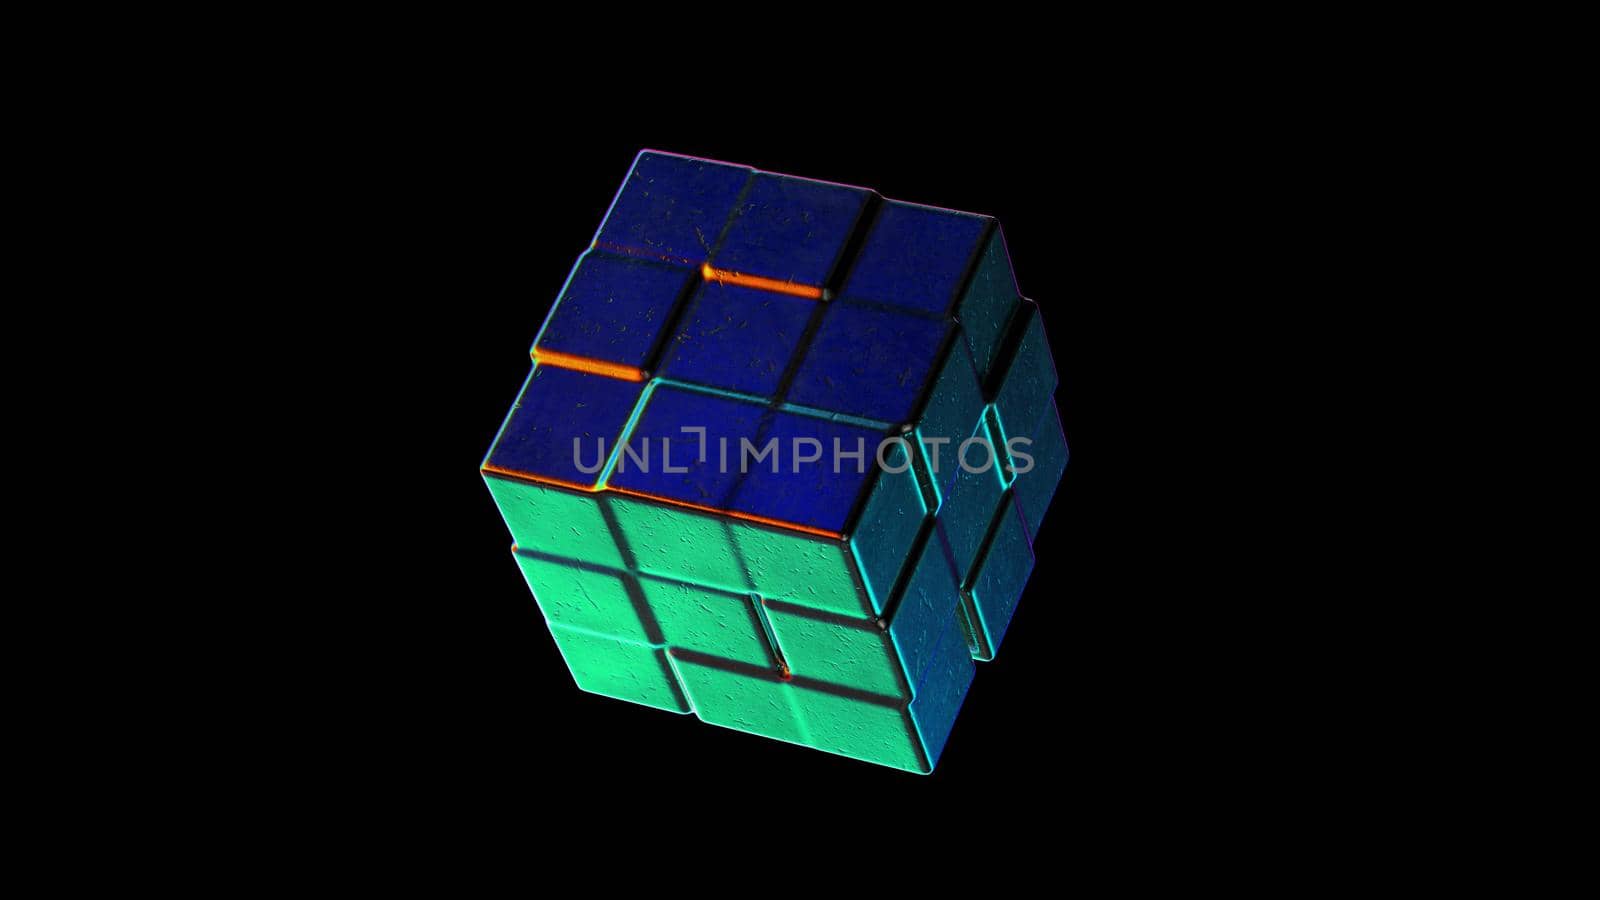 Abstract Metallic Cube Morphing with Rainbow Reflections 3d render